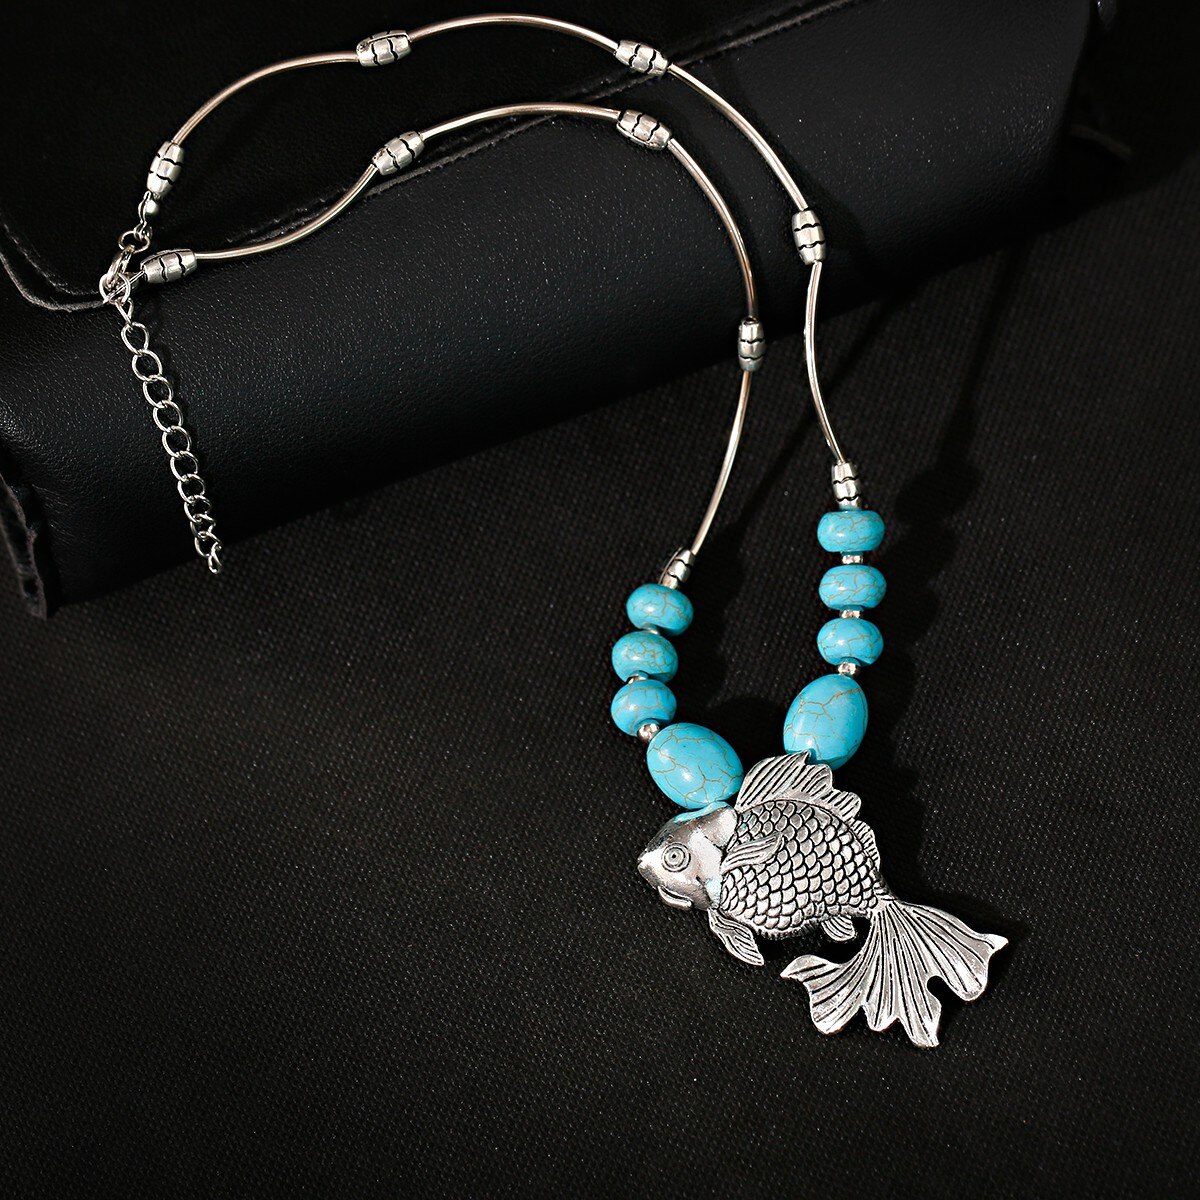 2022-Ethnic-Gypsy-Boho-Necklace-For-Women-Jewelry-Silver-Color-Fish-Shape-Turquoises-Indian-Necklace-1005004708775510-3